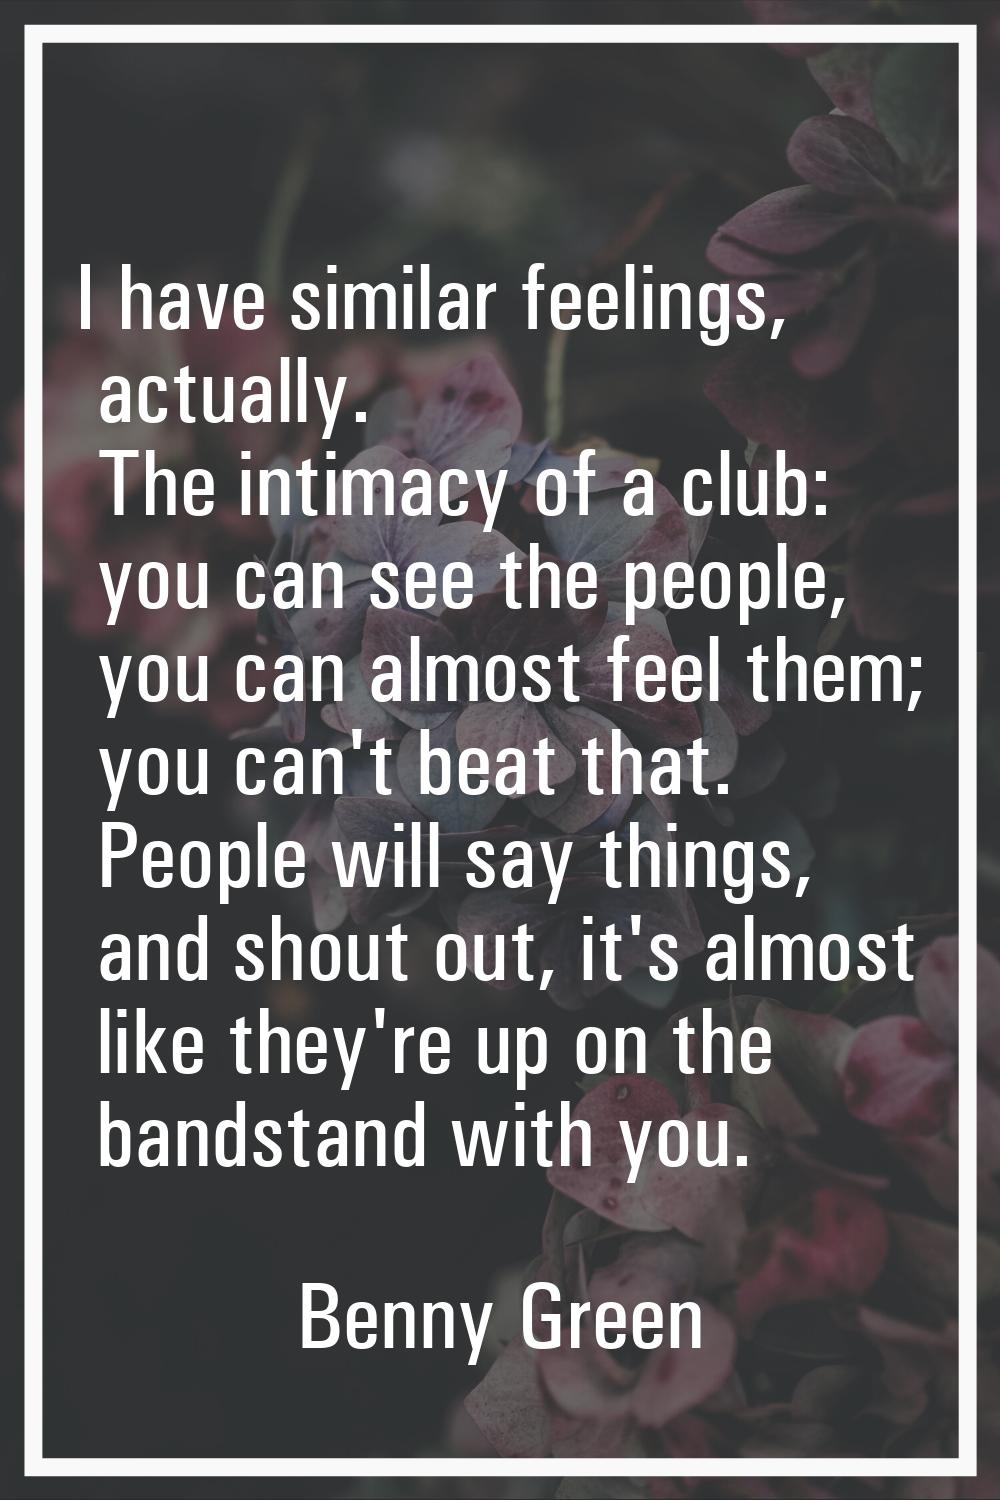 I have similar feelings, actually. The intimacy of a club: you can see the people, you can almost f